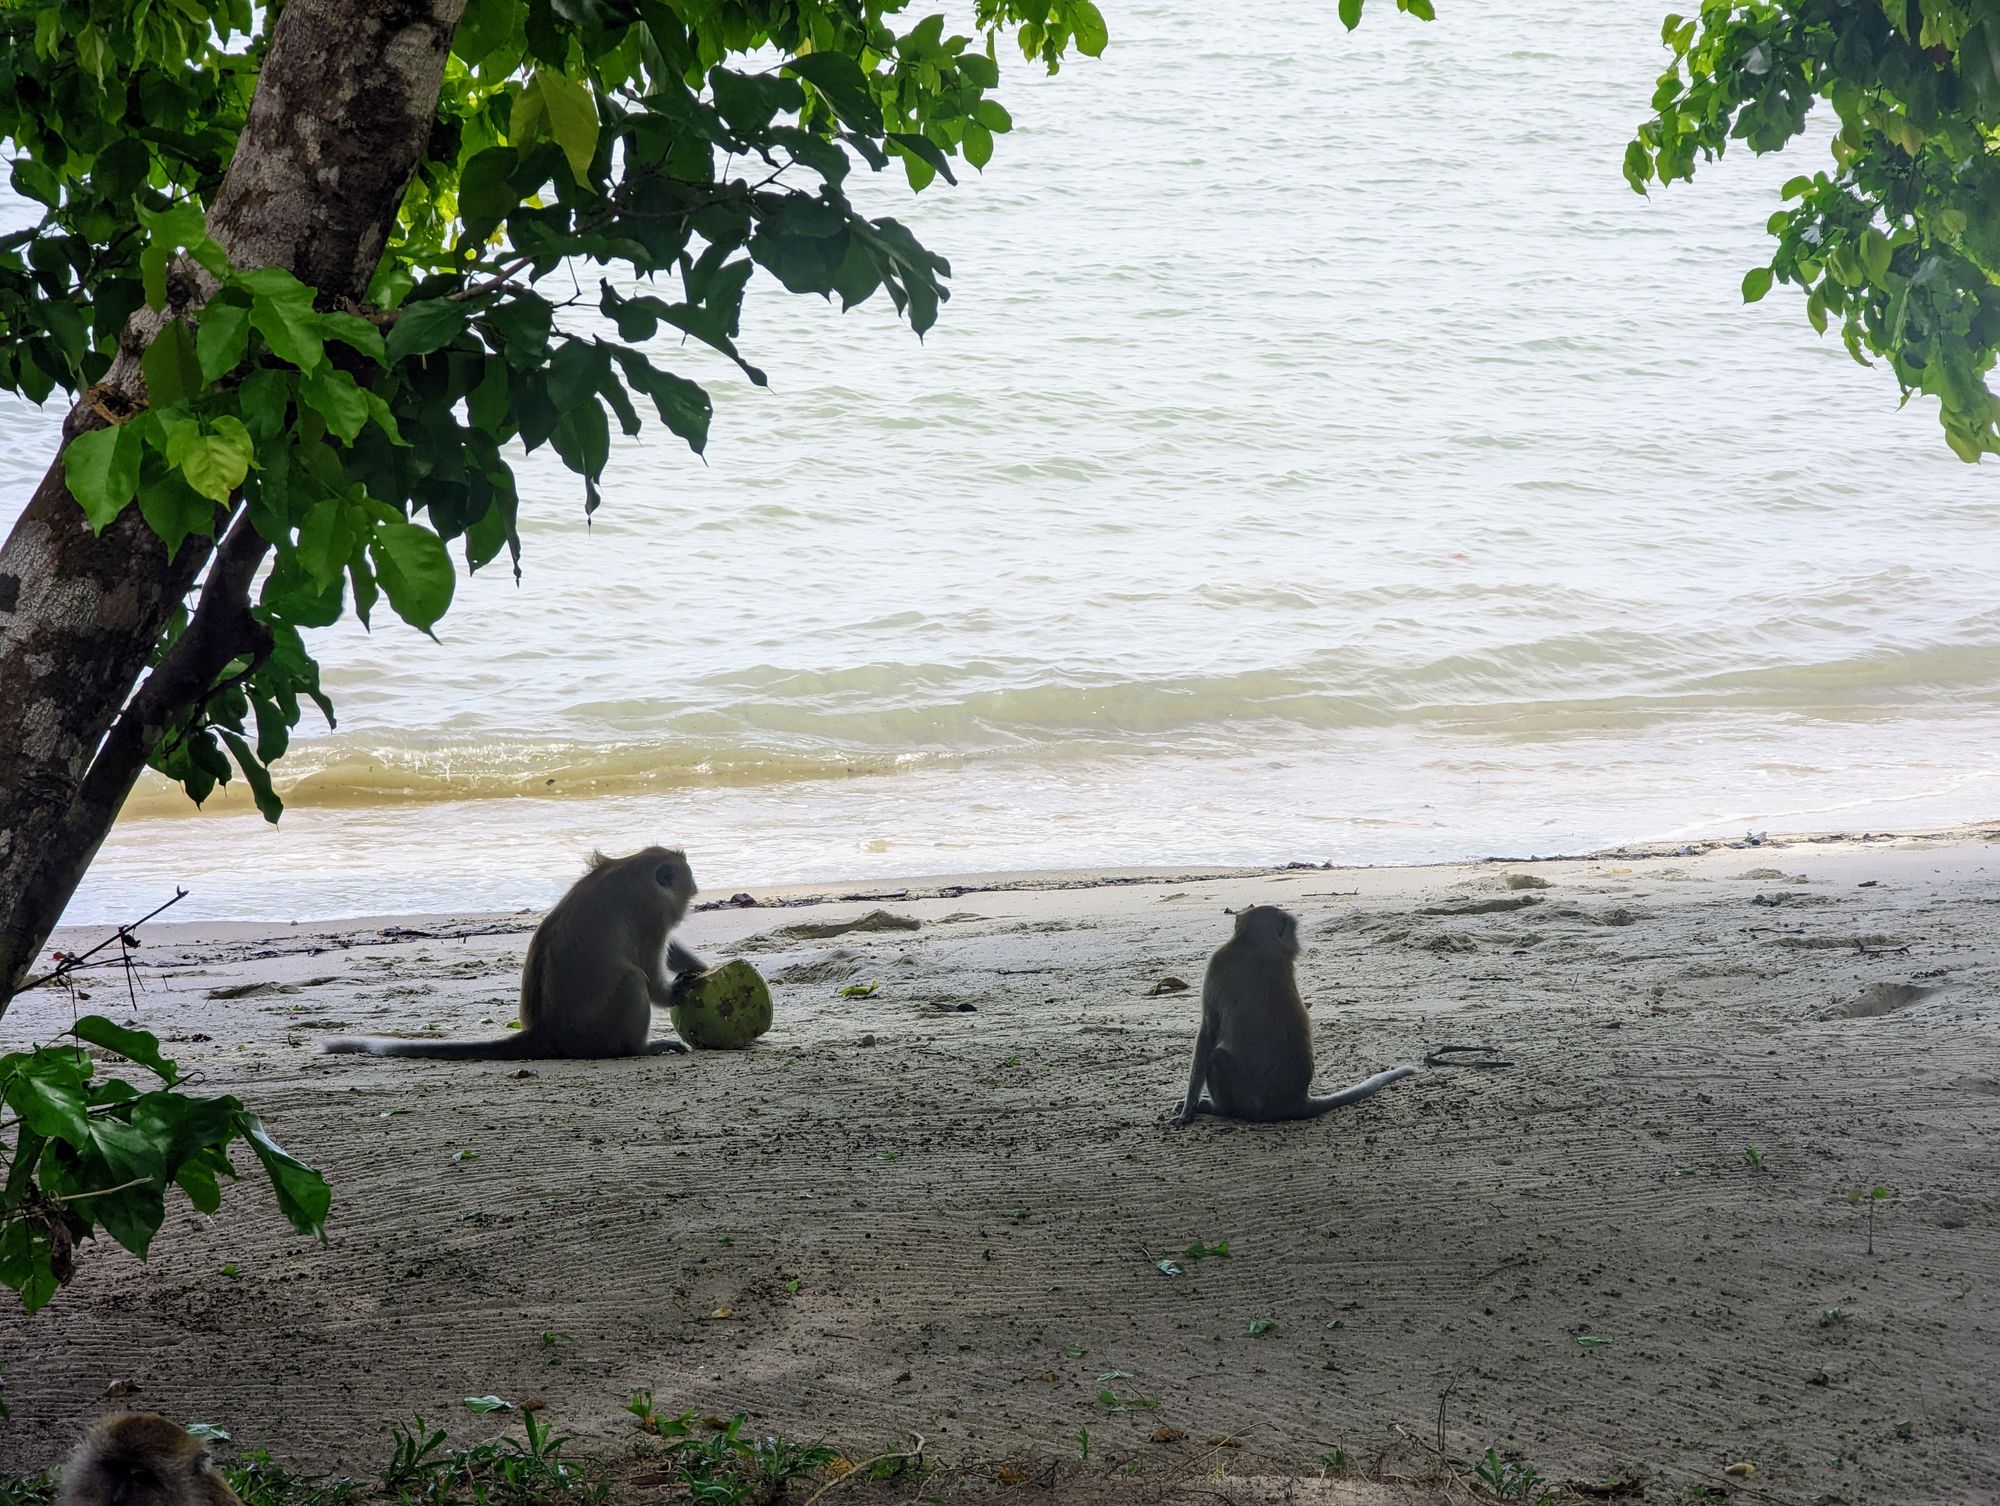 Two monkeys pick at a coconut on a beach.